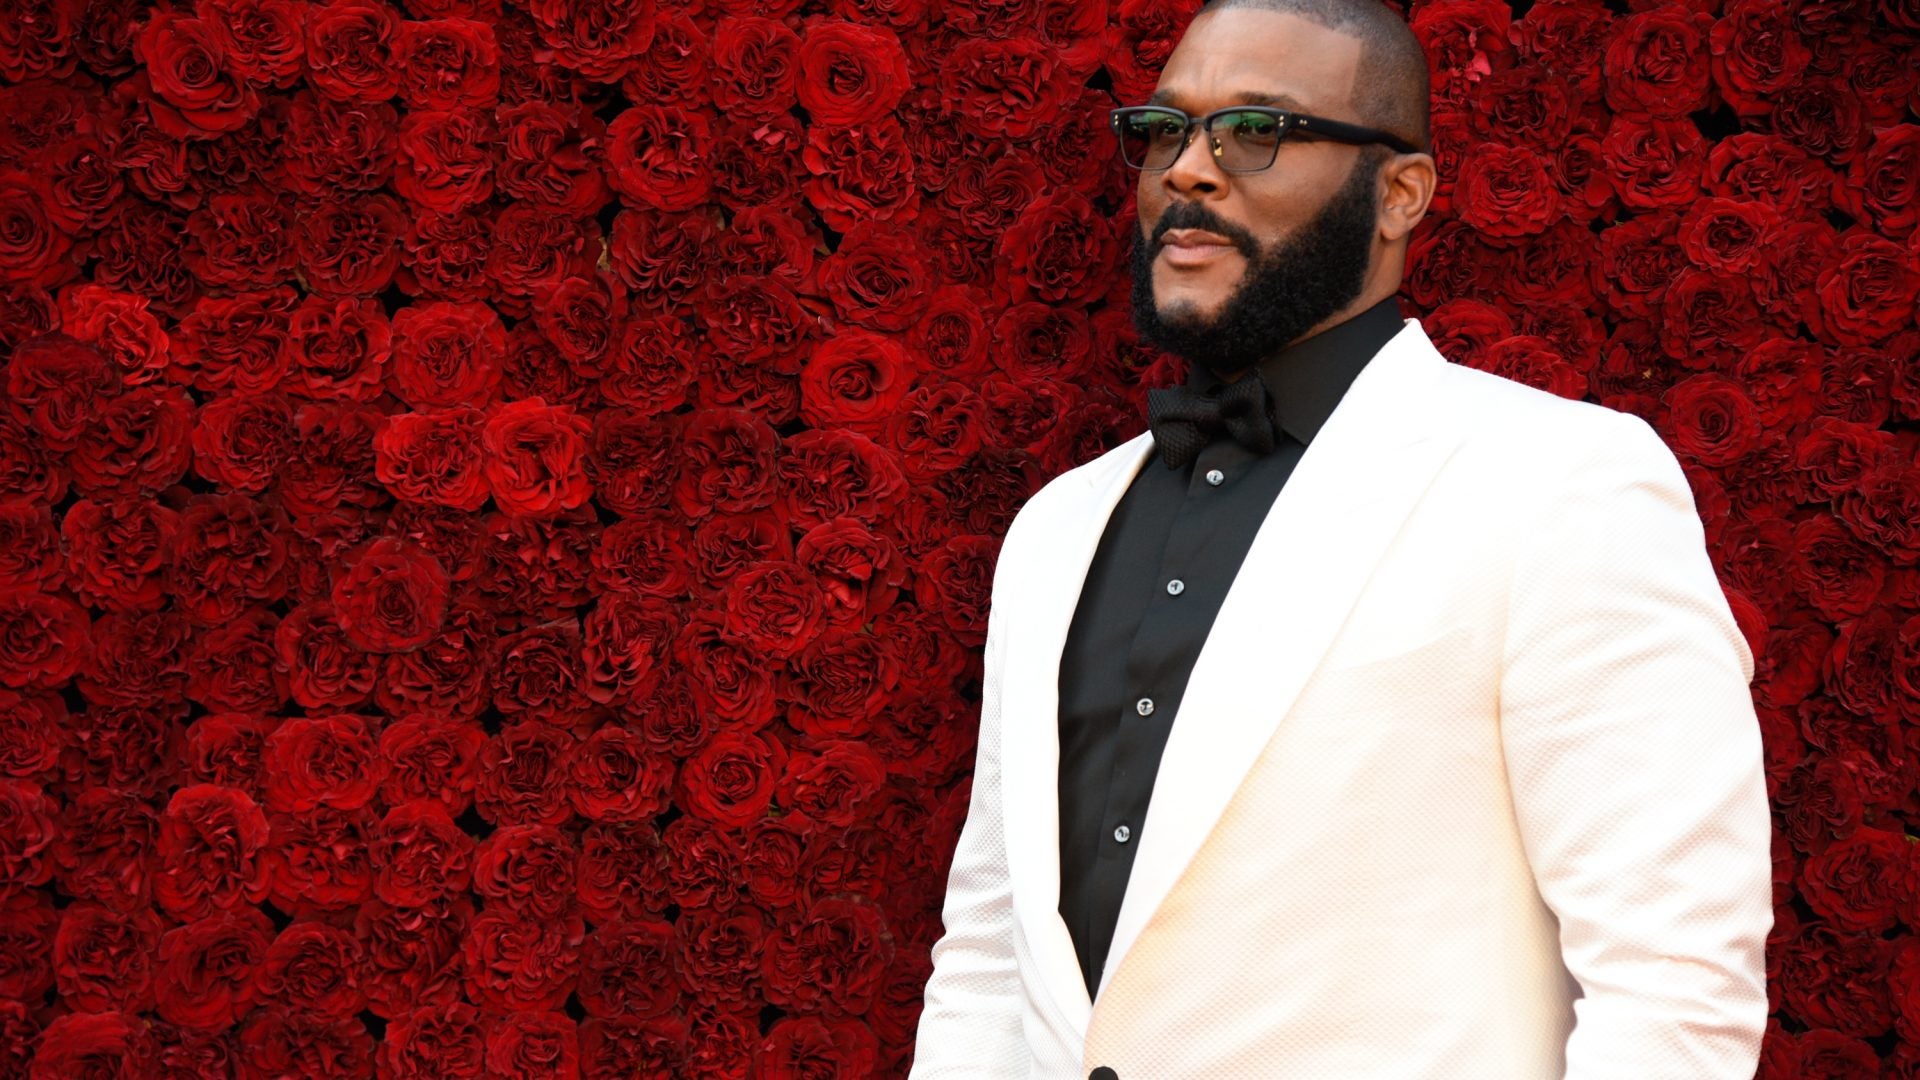 Tyler Perry Reveals He's Single In A Self-Reflective Instagram Post